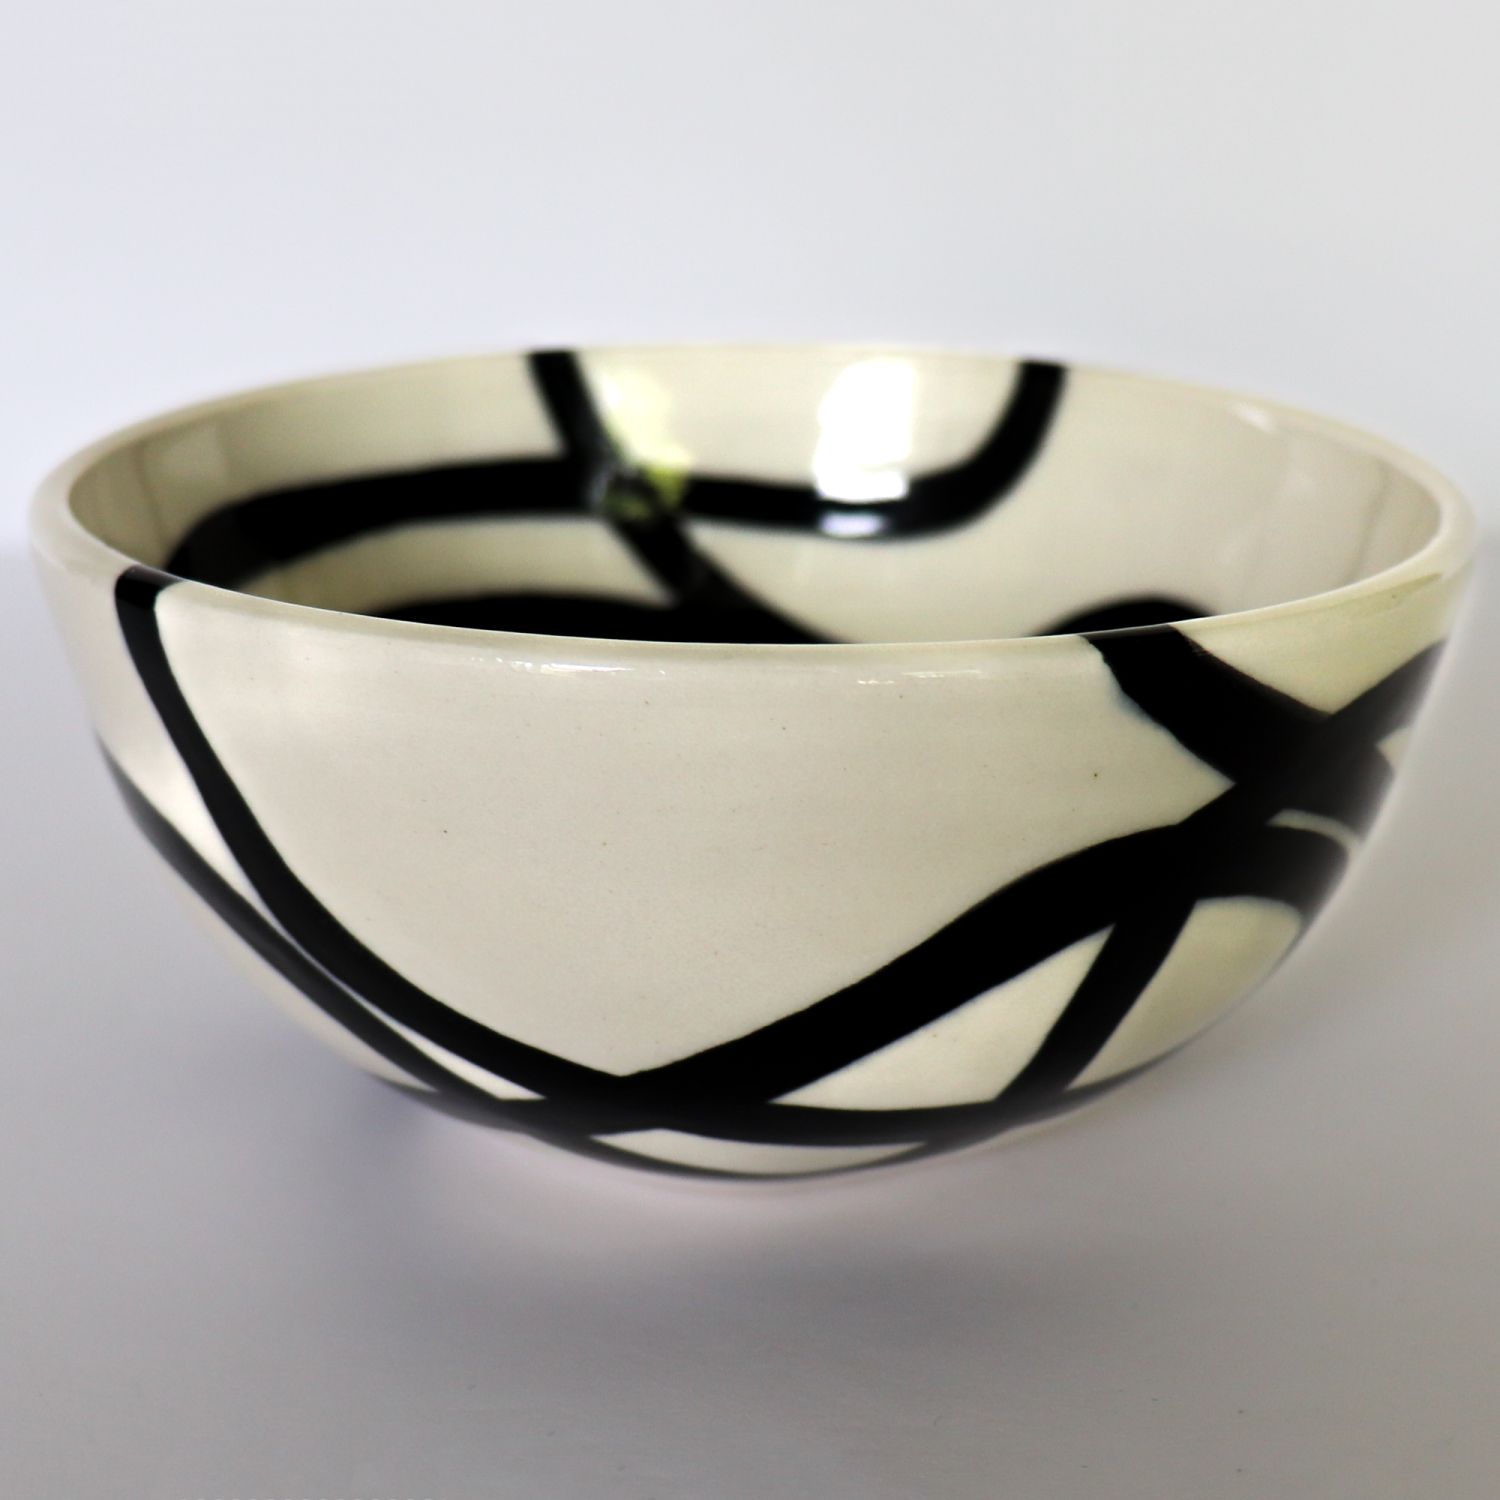 Alana Marcoccia: Interconnected Bowl – Large Product Image 3 of 5